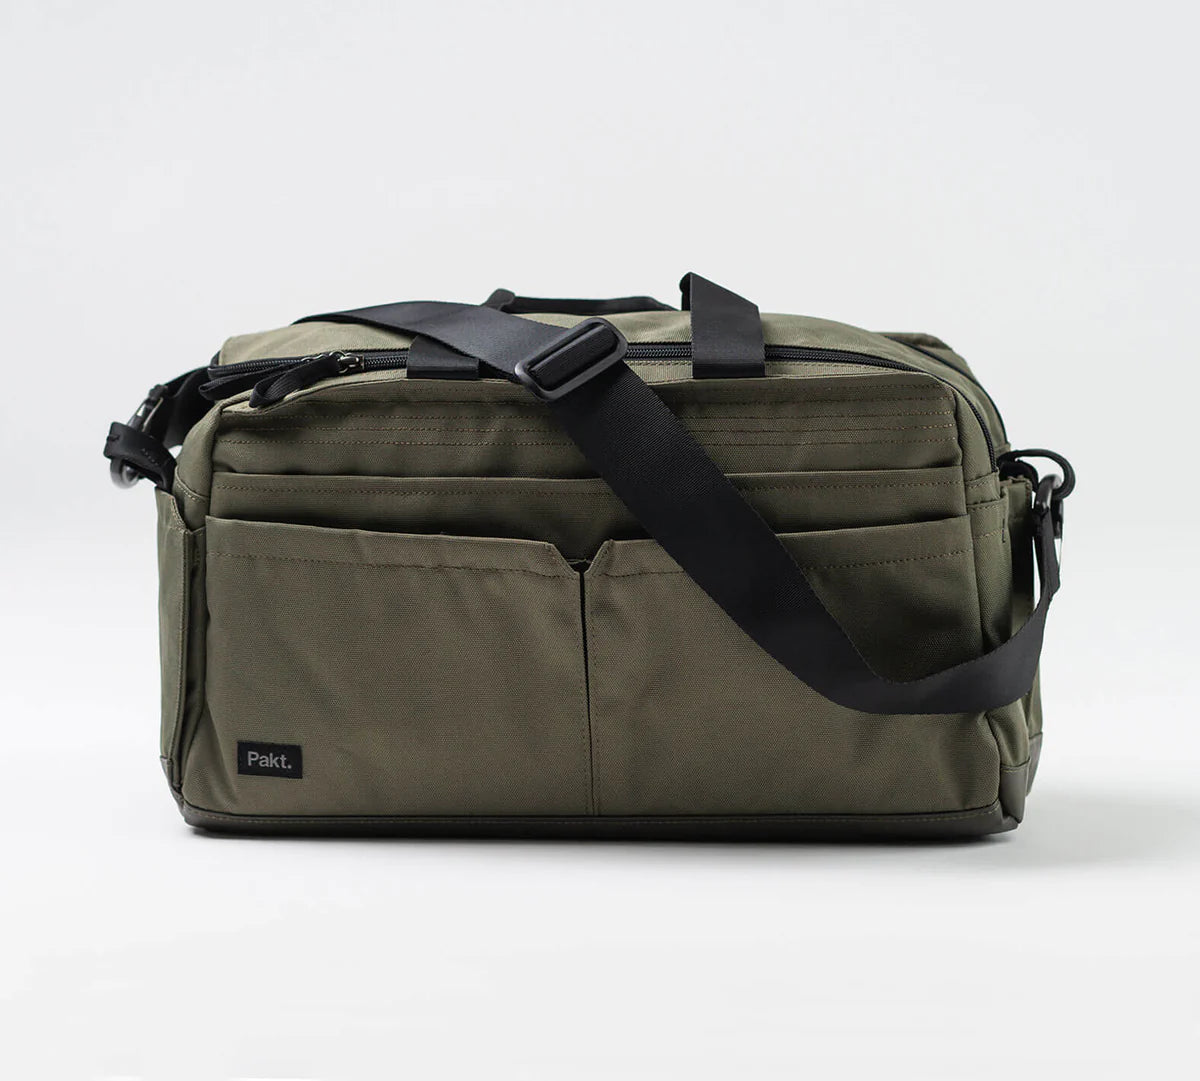 Duffel Bags for All Your Travels | Pakt